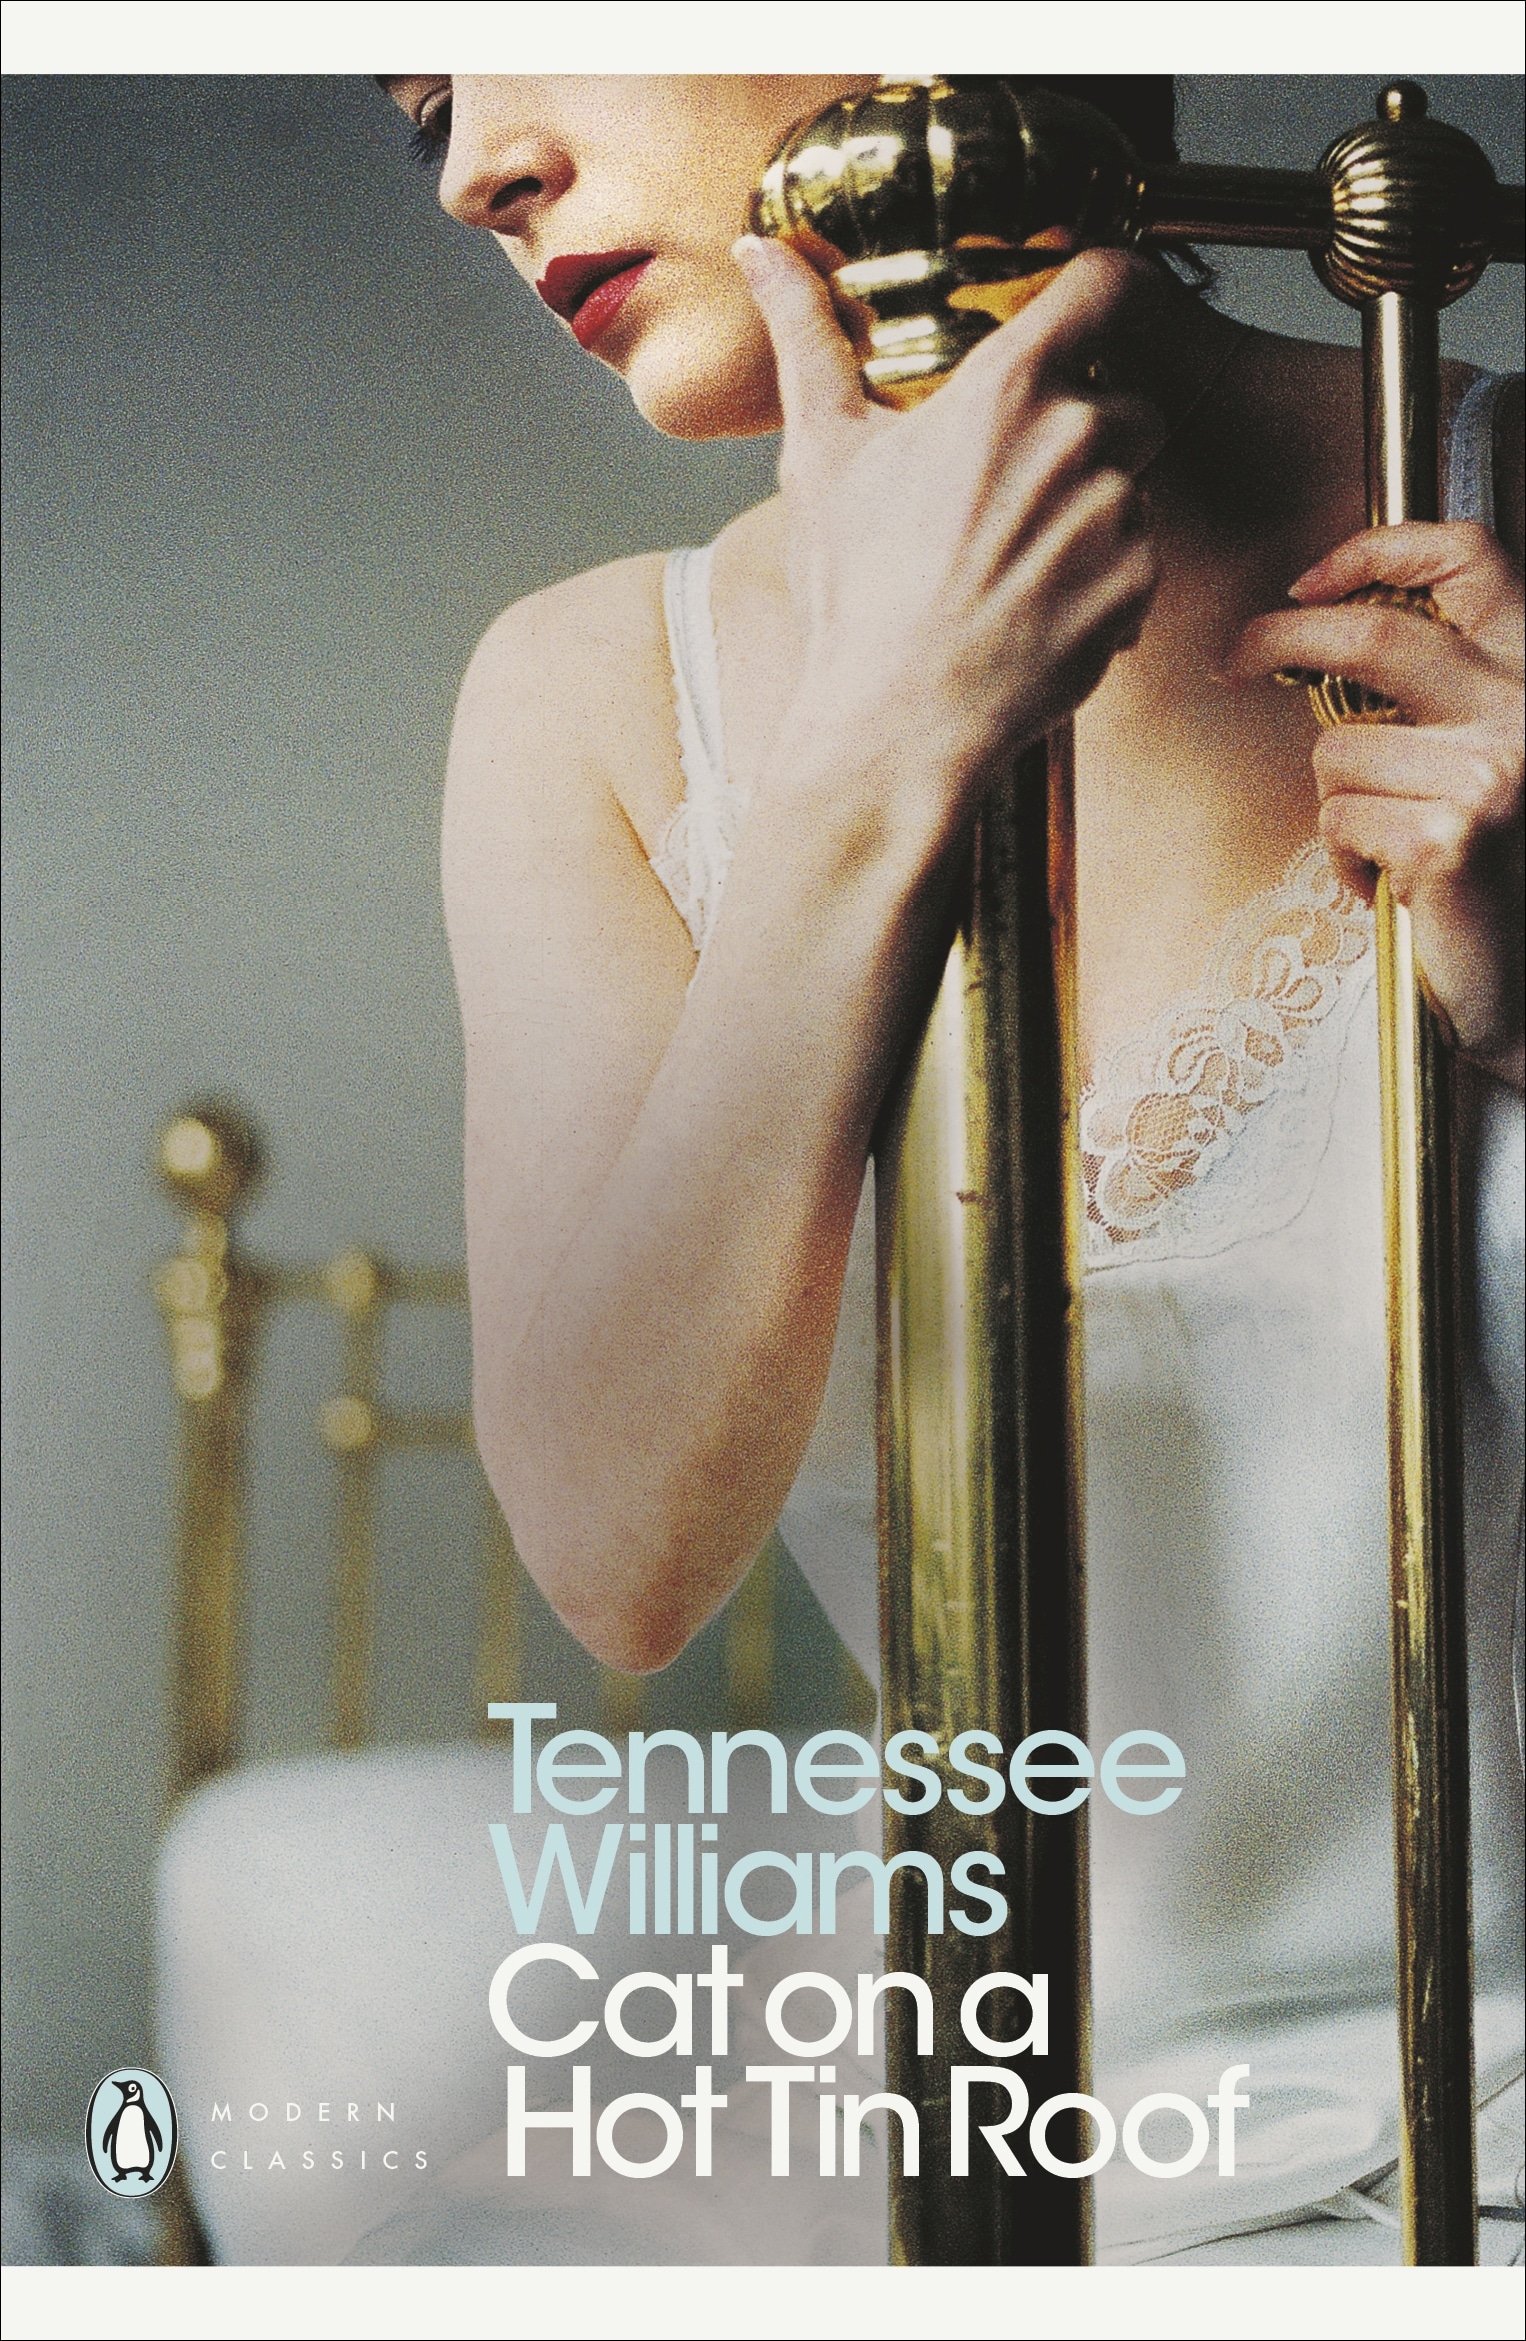 Book “Cat on a Hot Tin Roof” by Tennessee Williams — March 5, 2009